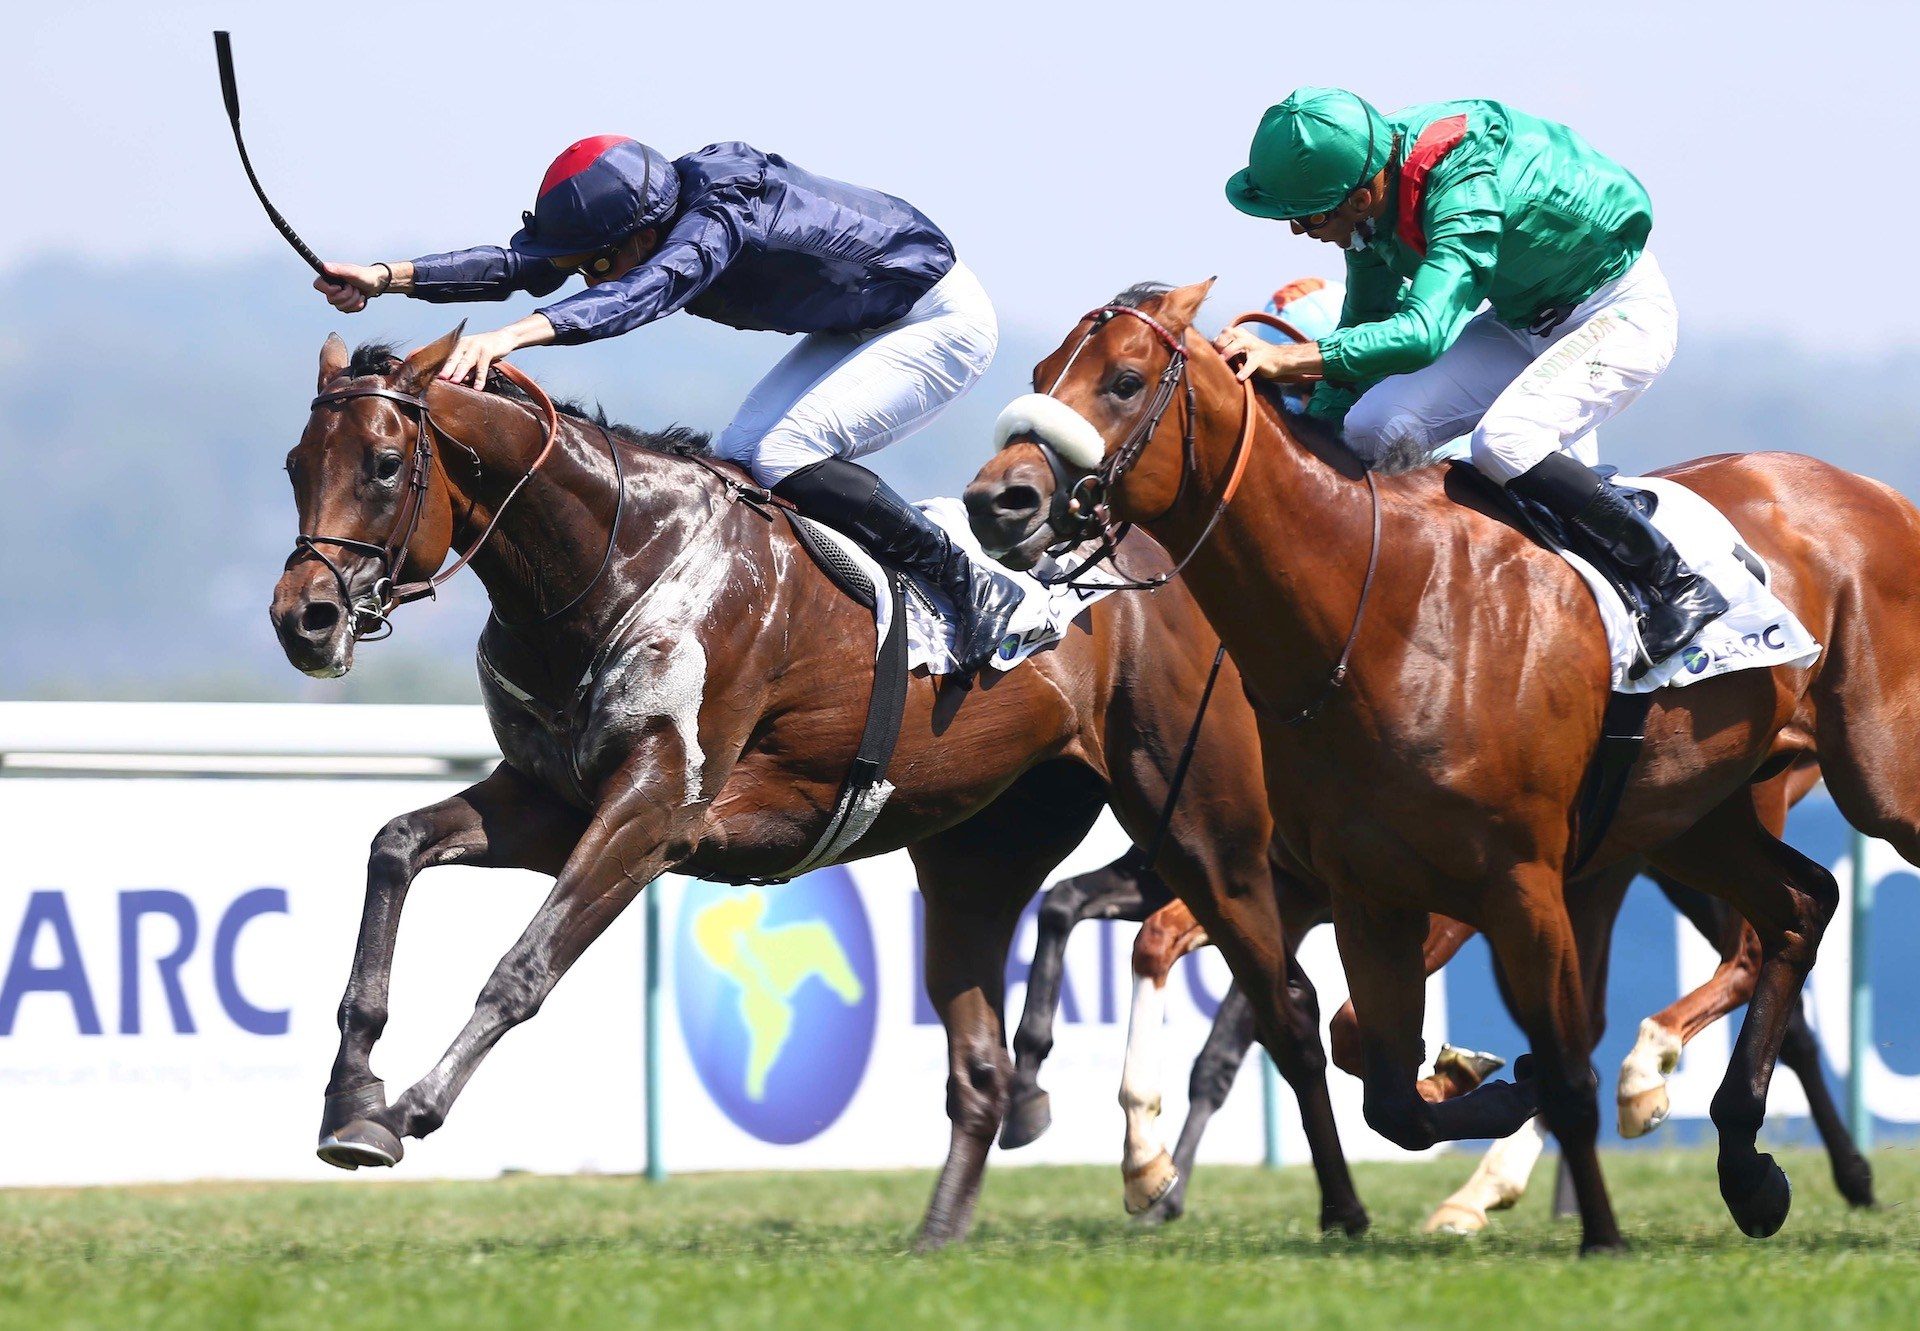 Measure Of Time (Gleneagles) winning the Listed Prix Michel Houyvet at Deauville